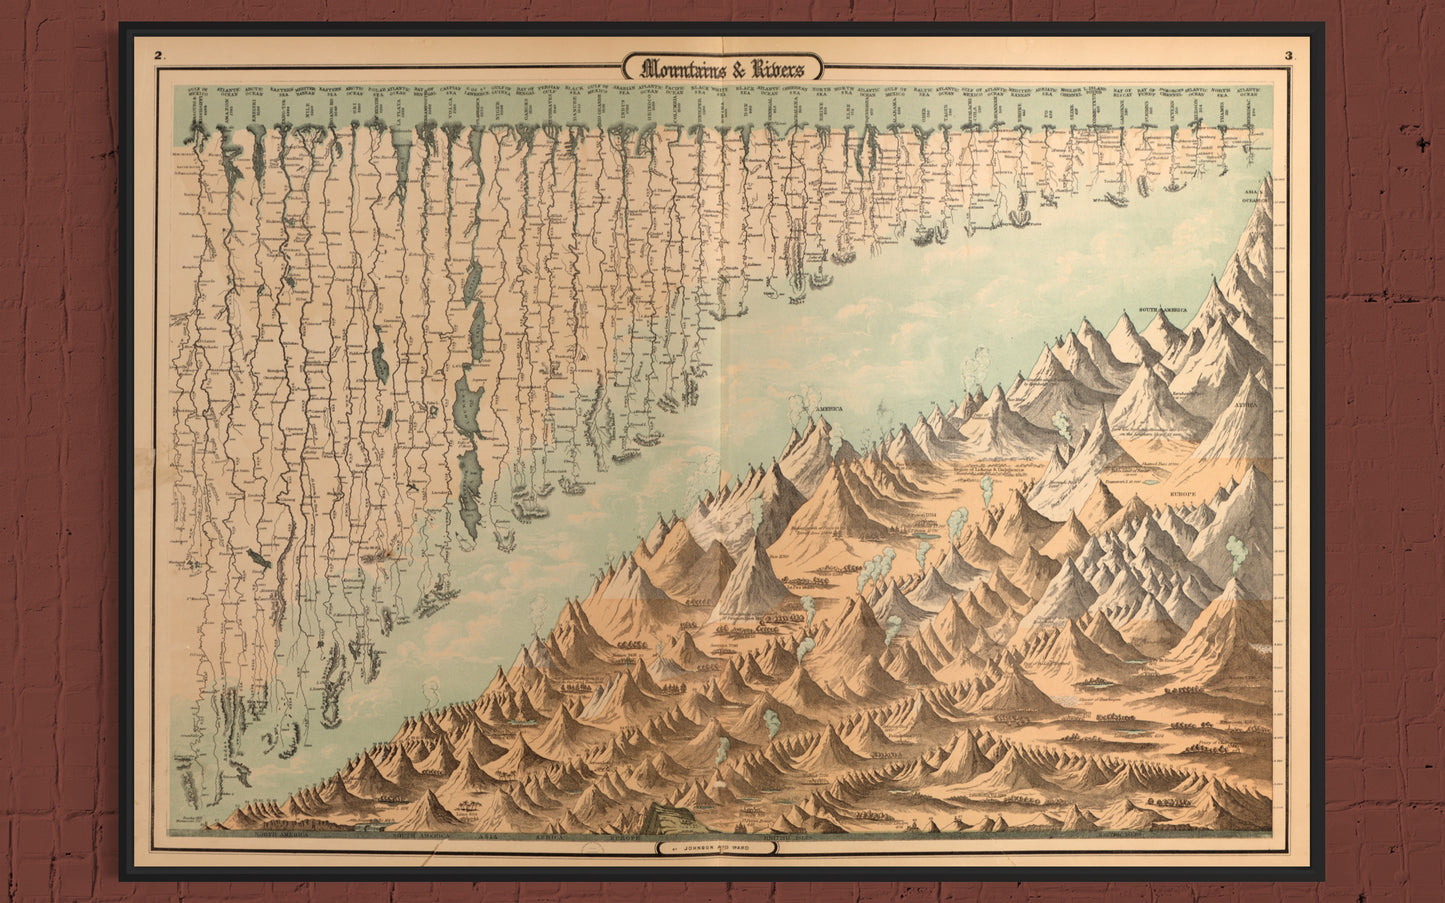 1862 Comparative World Mountains & Rivers Map